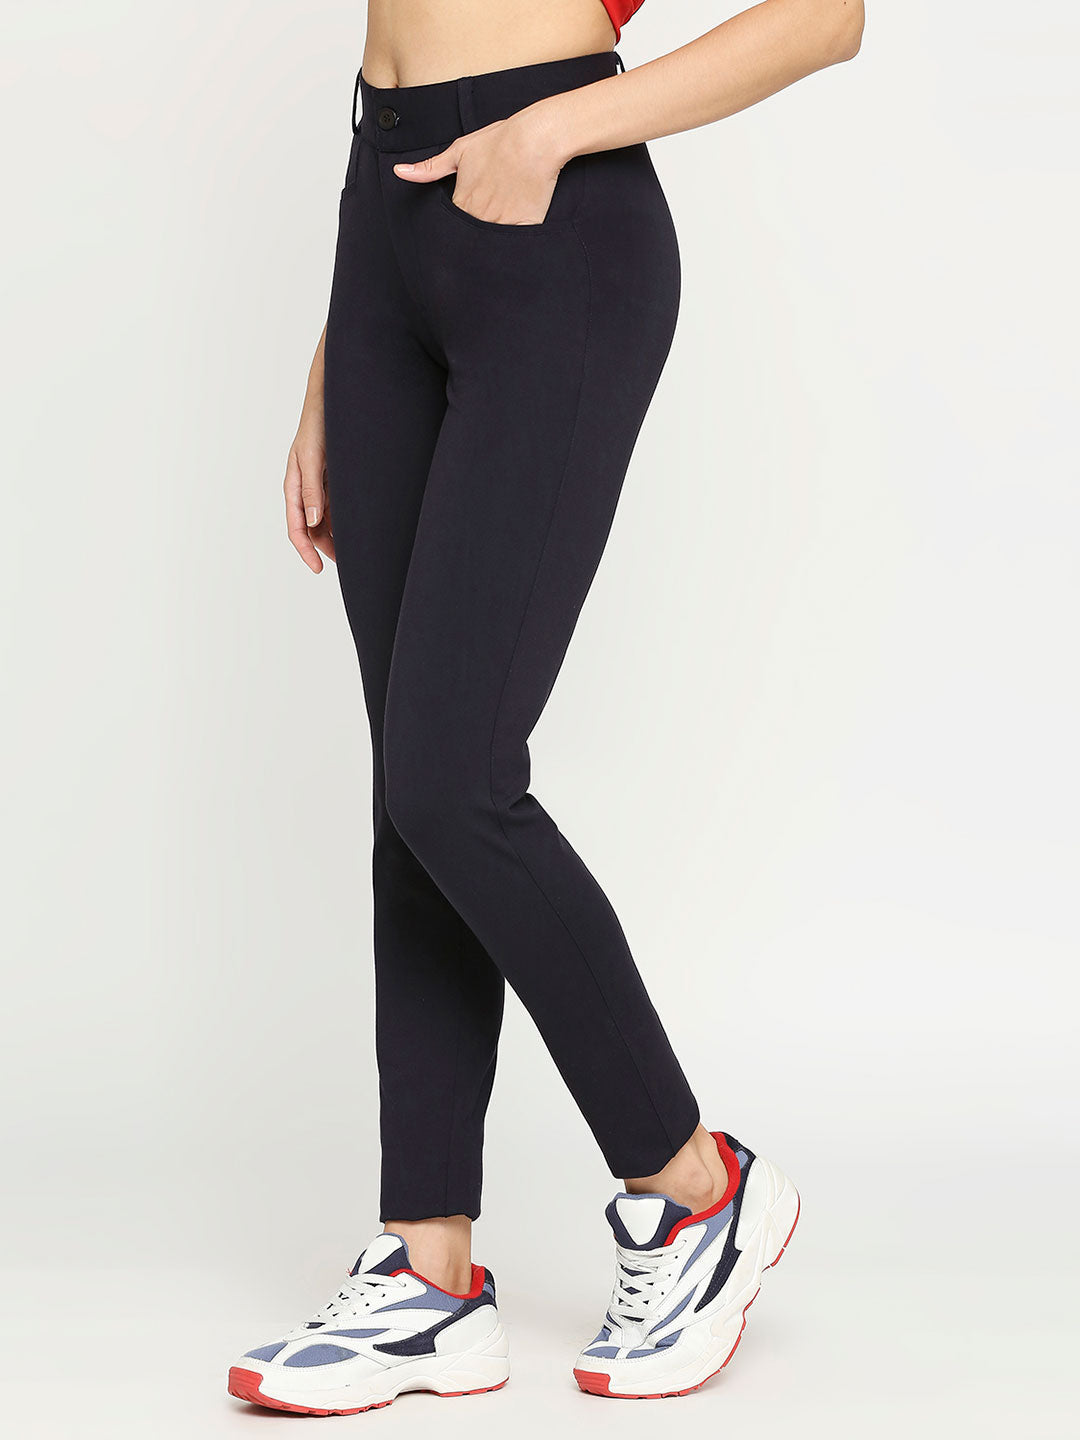 Pants Collection | Shop Canadian-Made Ethical Women's Clothing – Encircled